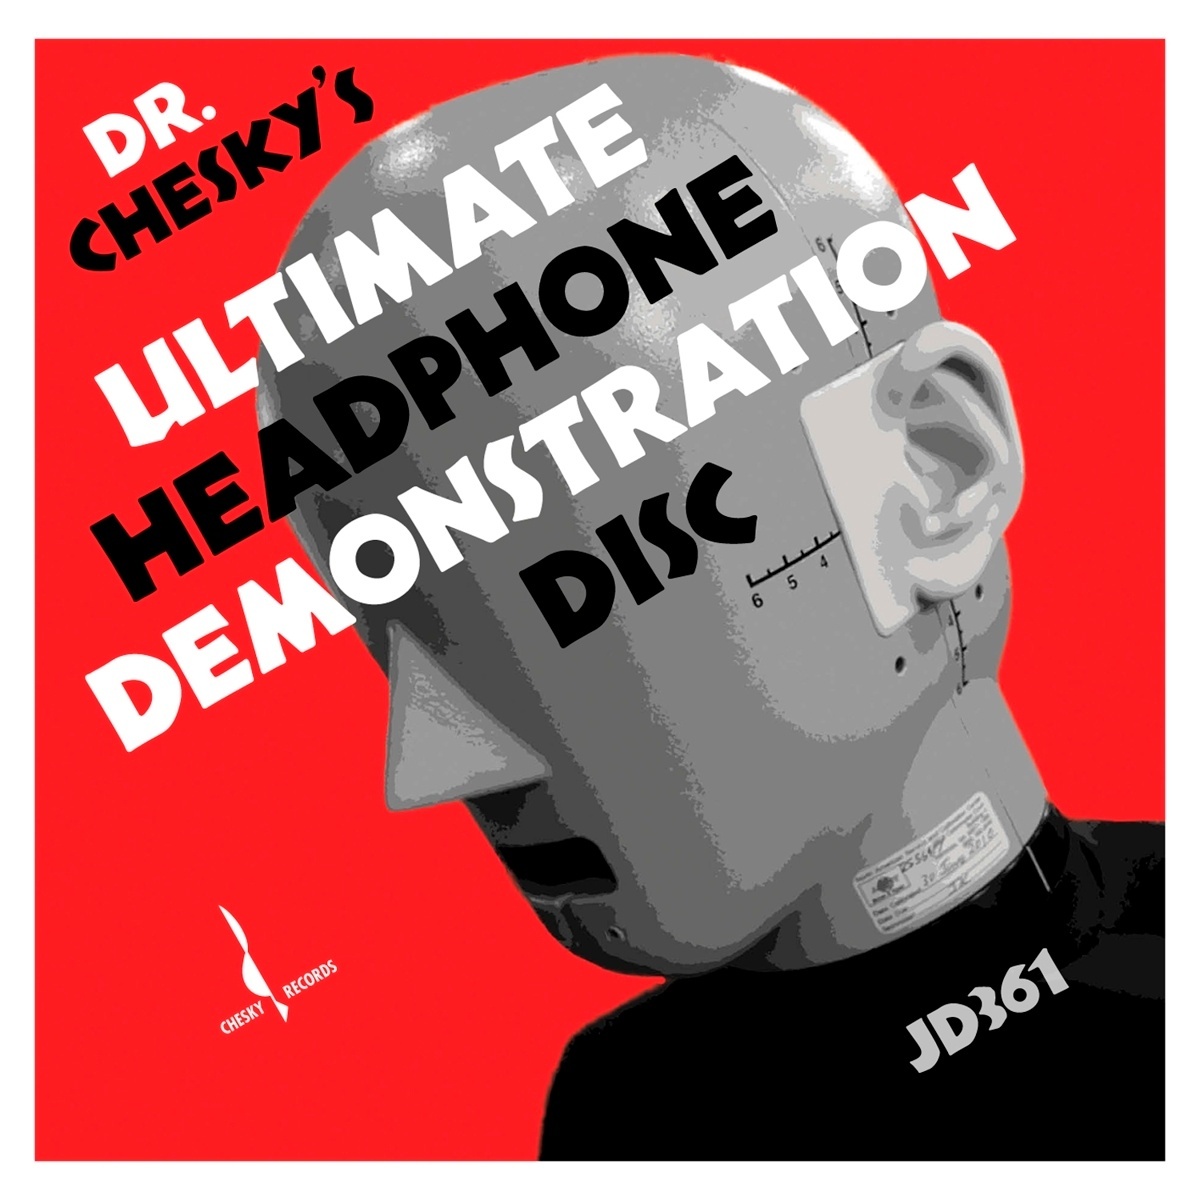 The Ultimate Headphone Demonstratio - Dr.Chesky. (CD)